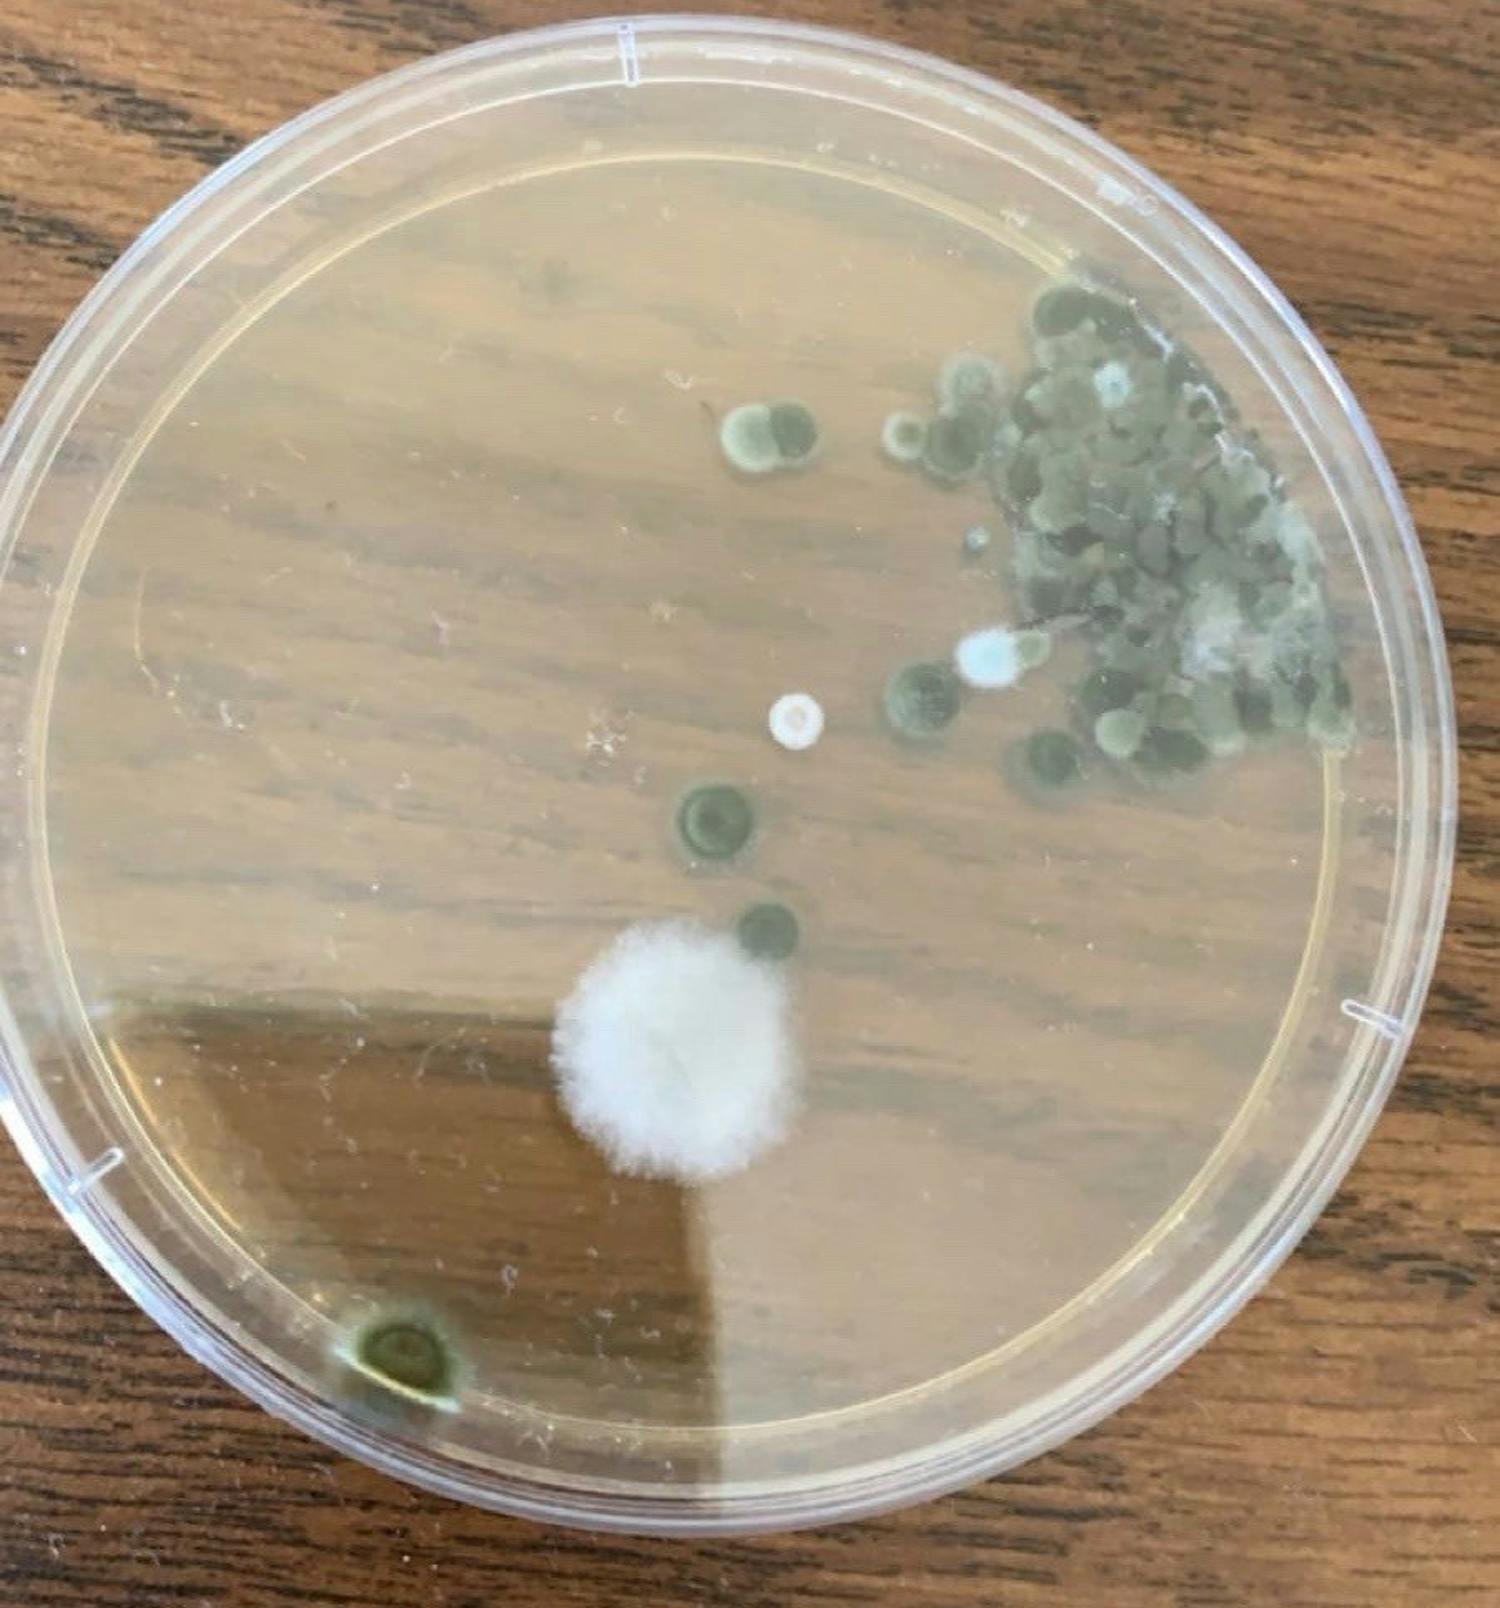 Black mold found in student's petrie dish